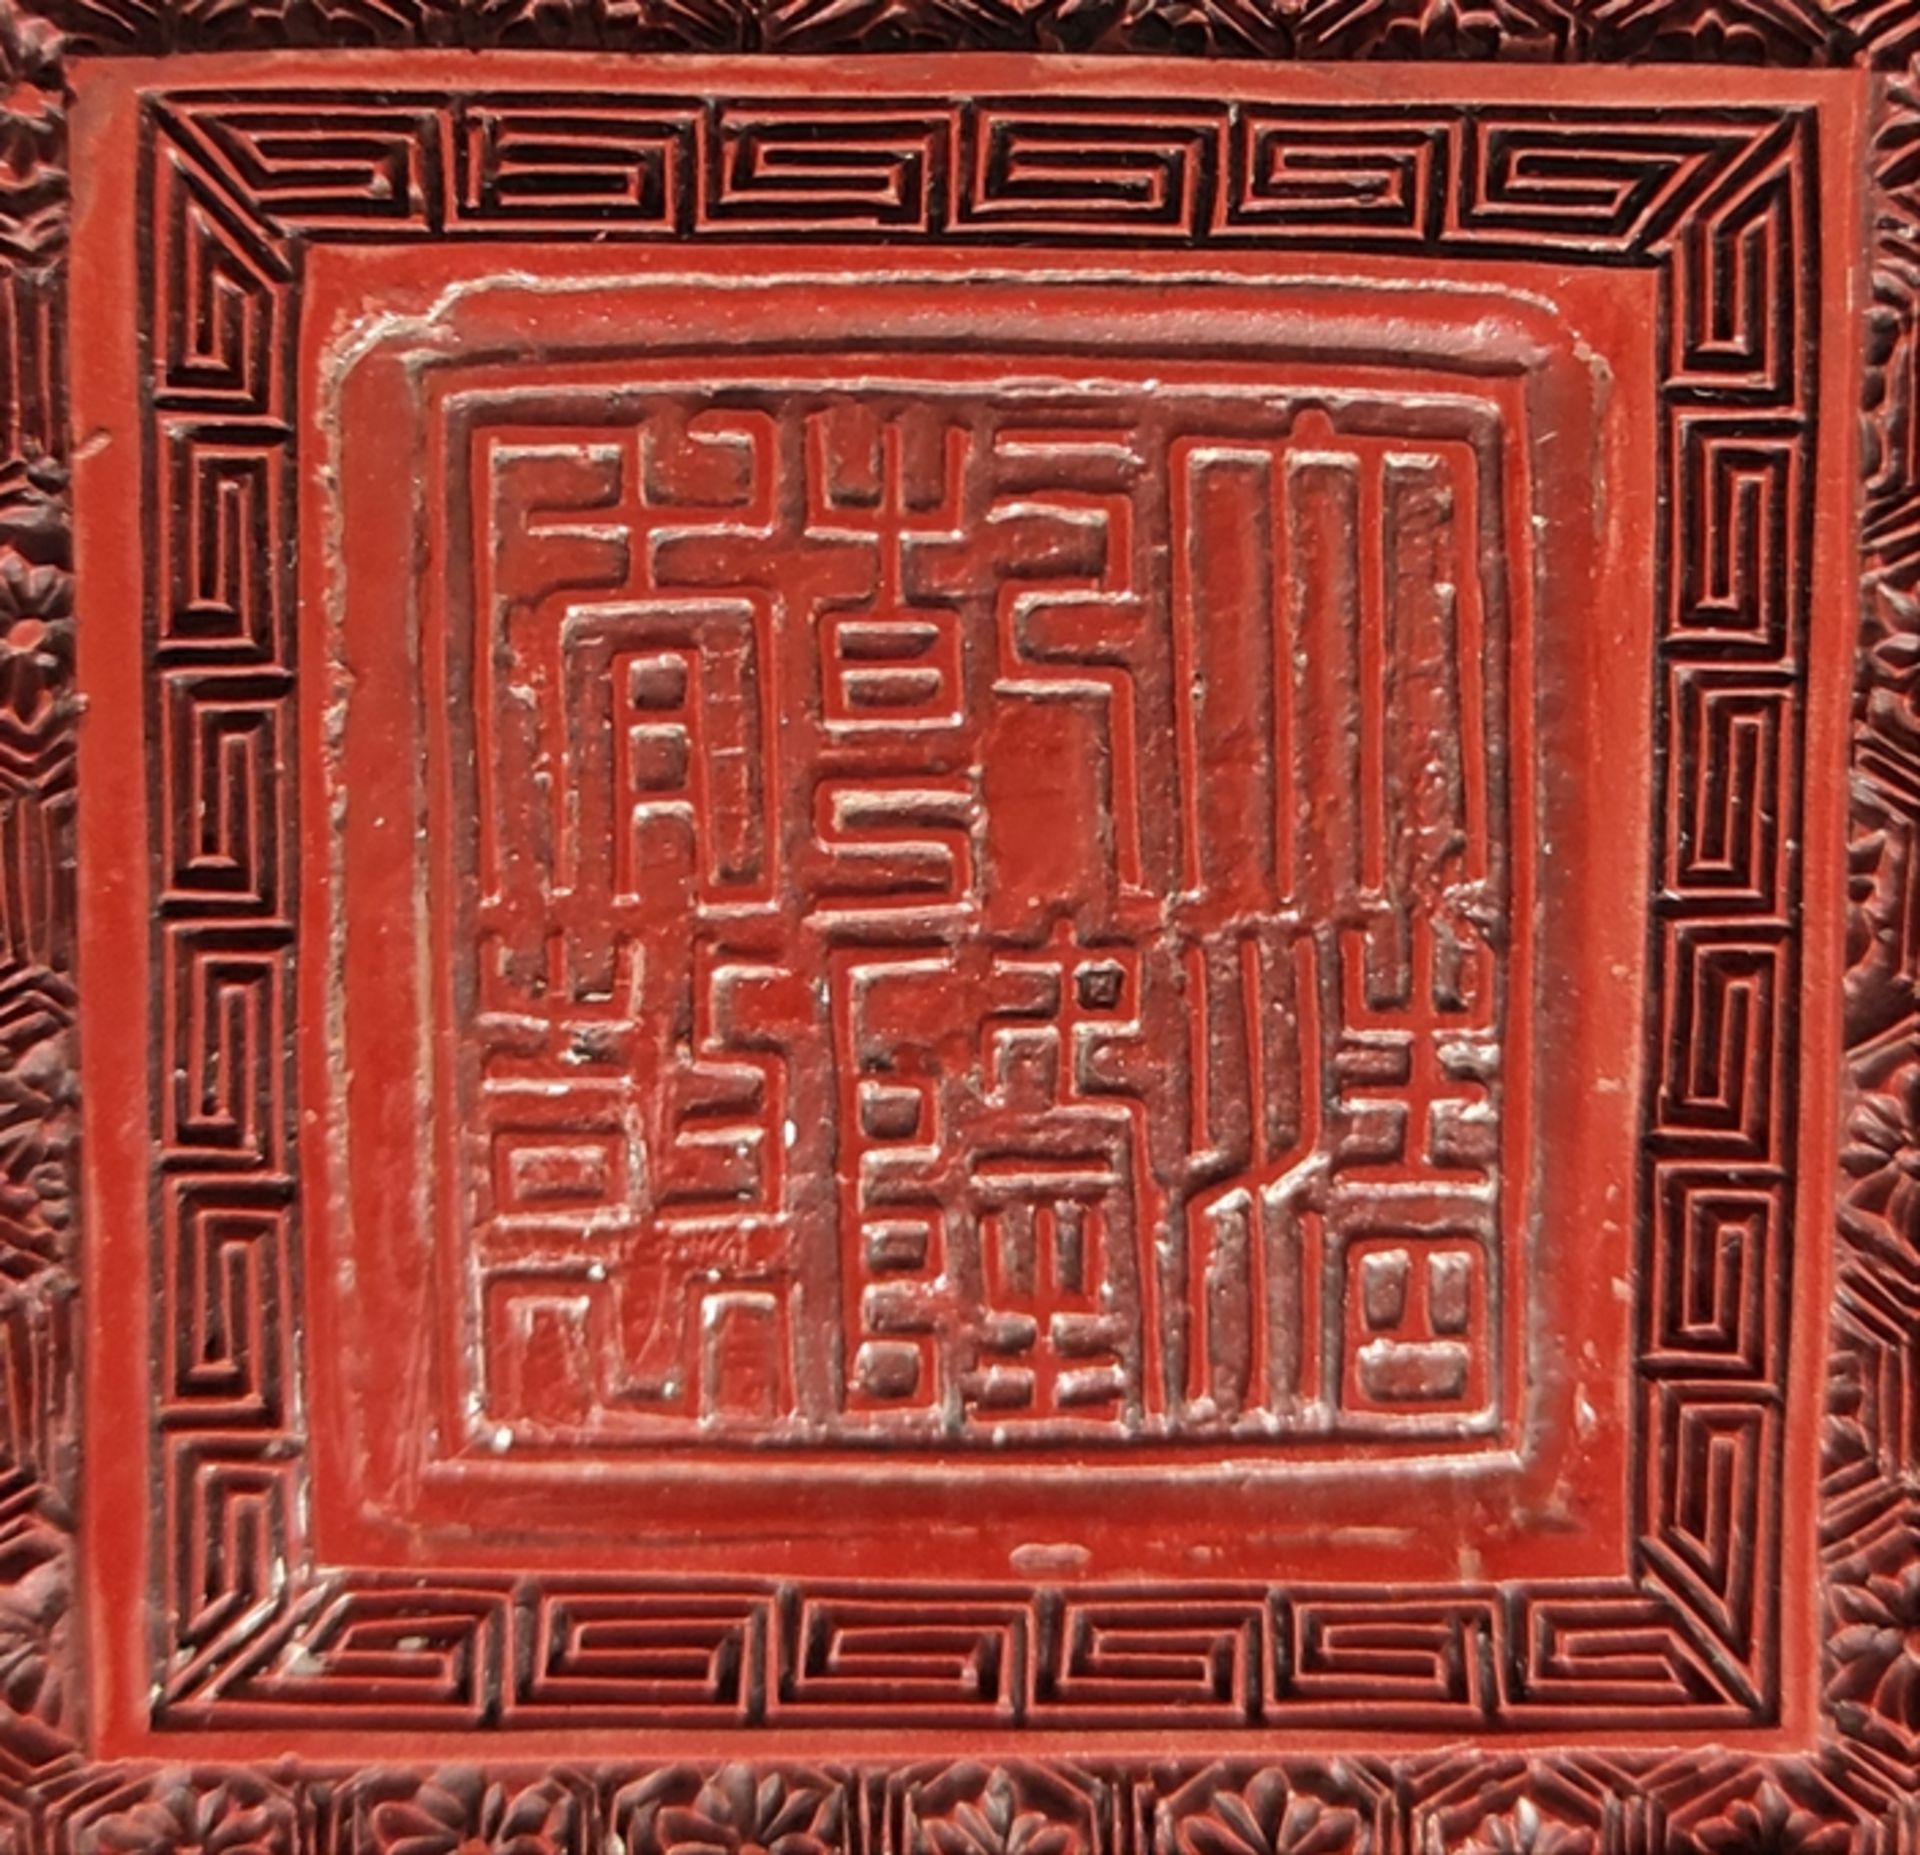 Tray richly carved with figural scenes, museum copy, archaic Qianlong mark, 32x32cm - Image 3 of 3